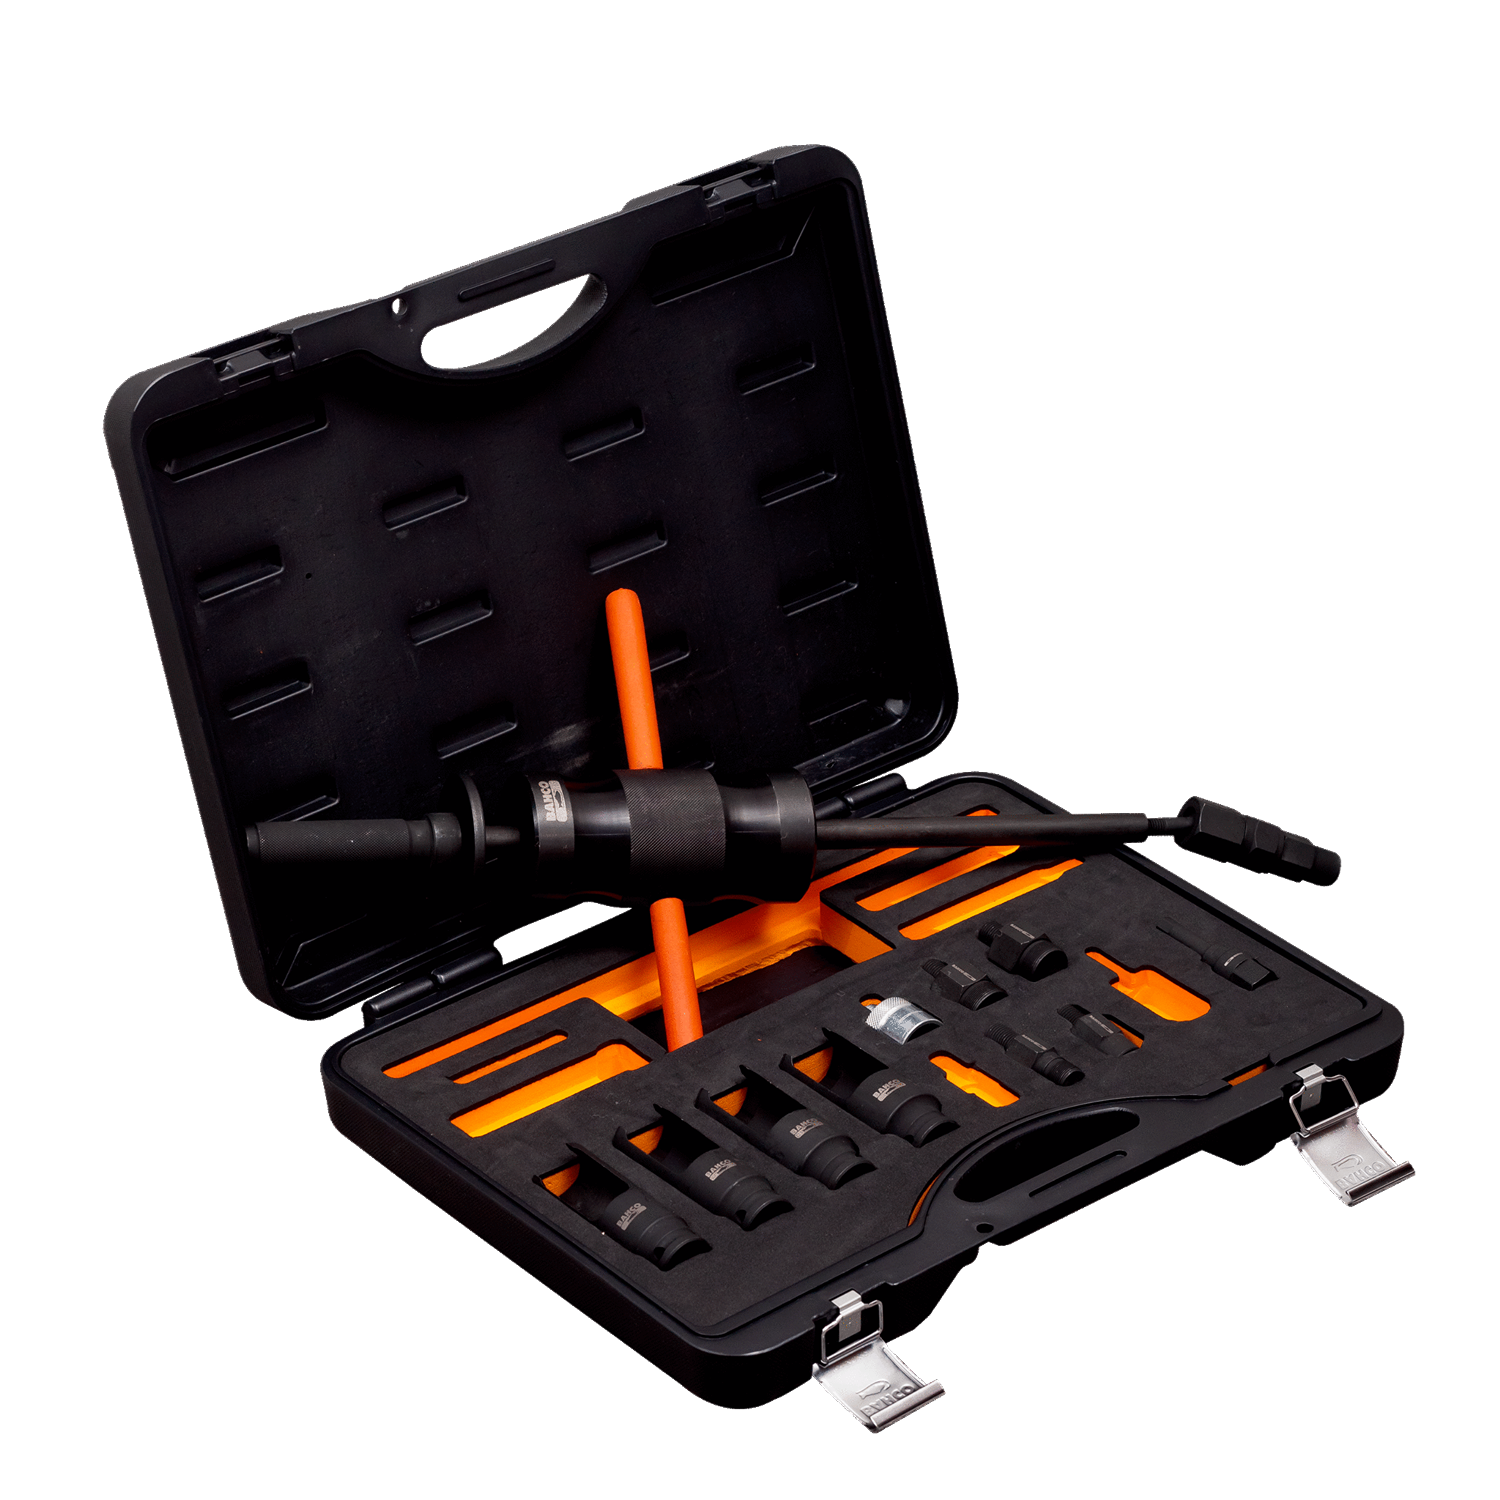 BAHCO BE1311P13 Injector Puller Set (BAHCO Tools) - Premium Injector Puller Set from BAHCO - Shop now at Yew Aik.